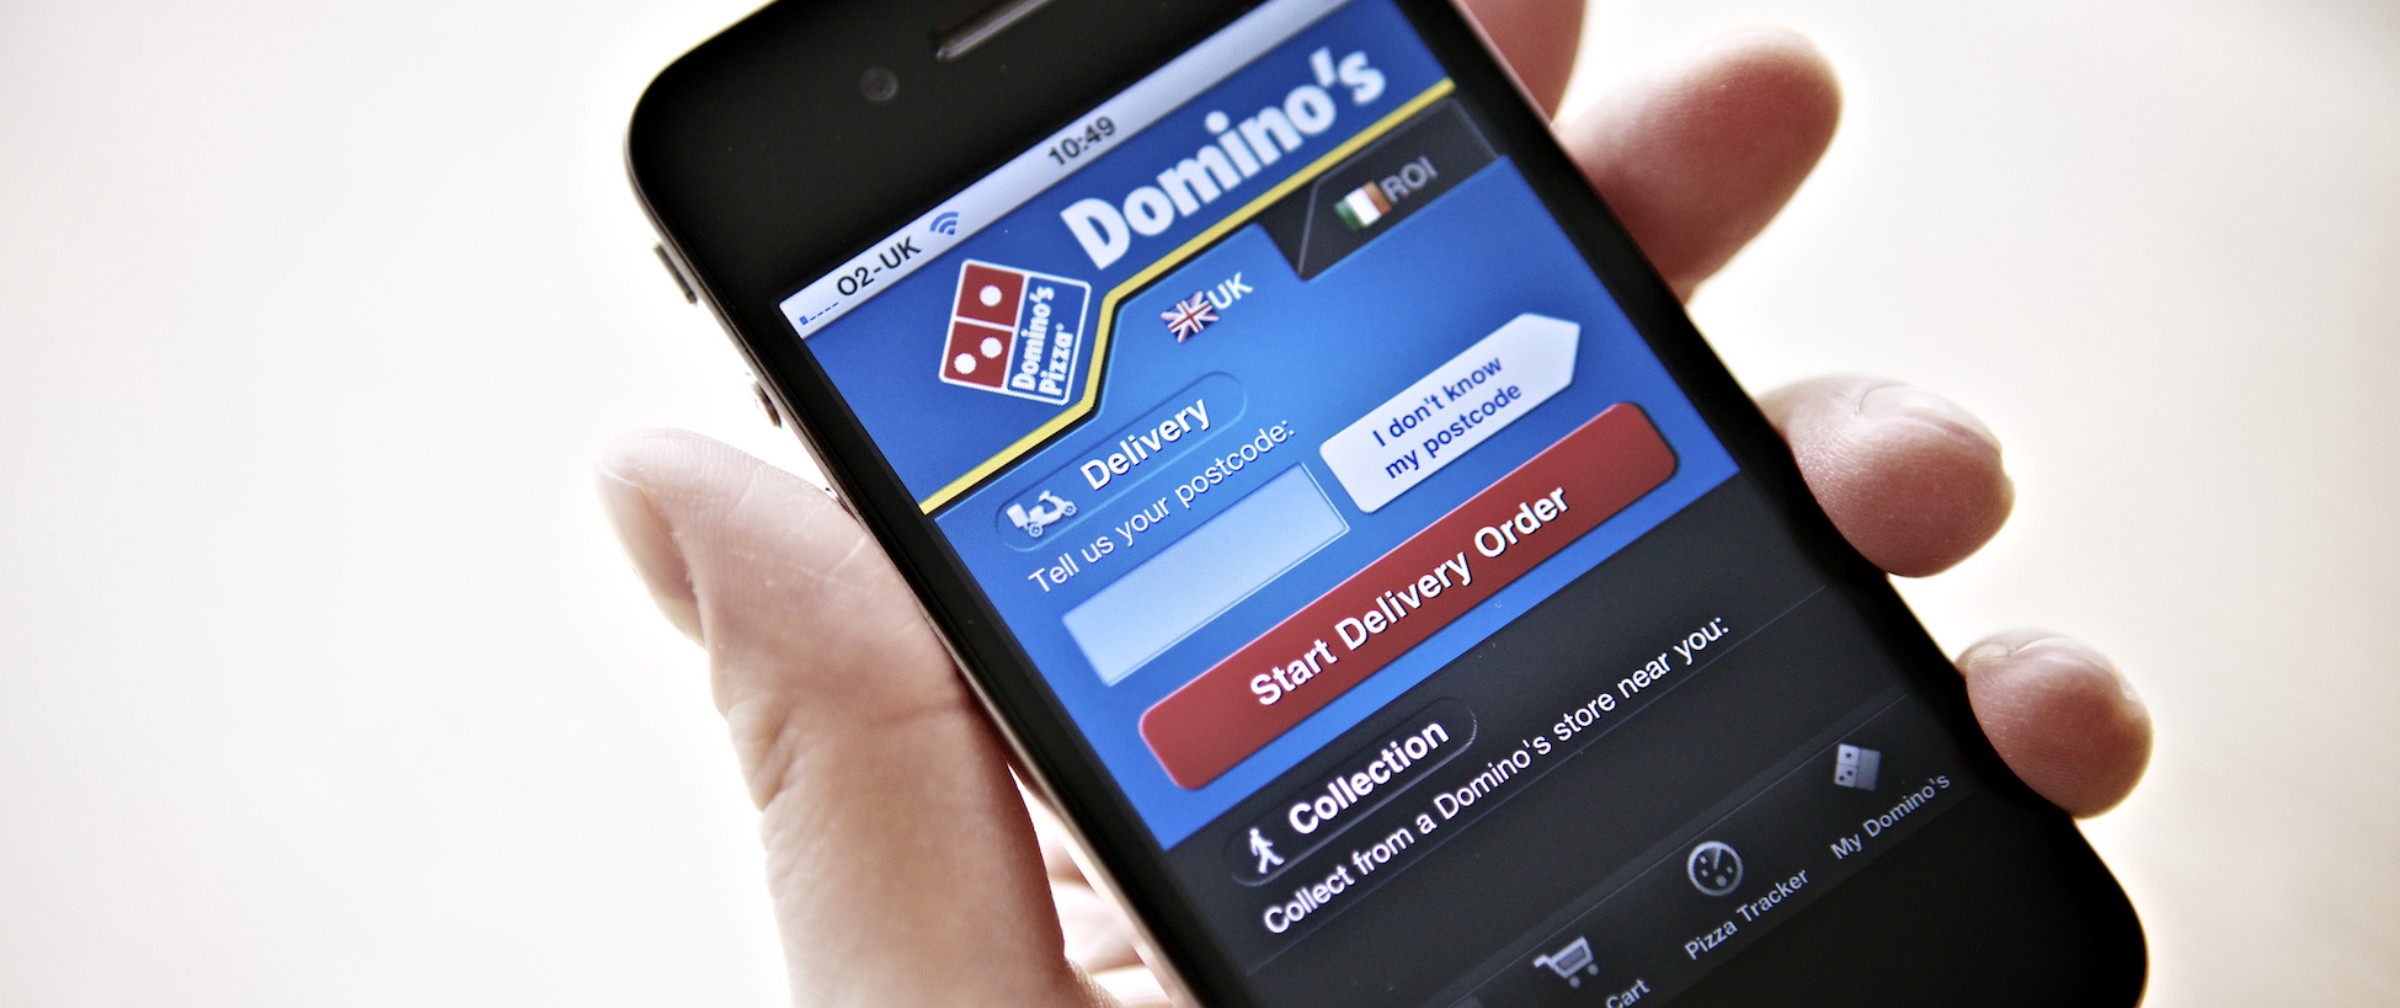 Domino’s Pizza app must be accessible to blind people